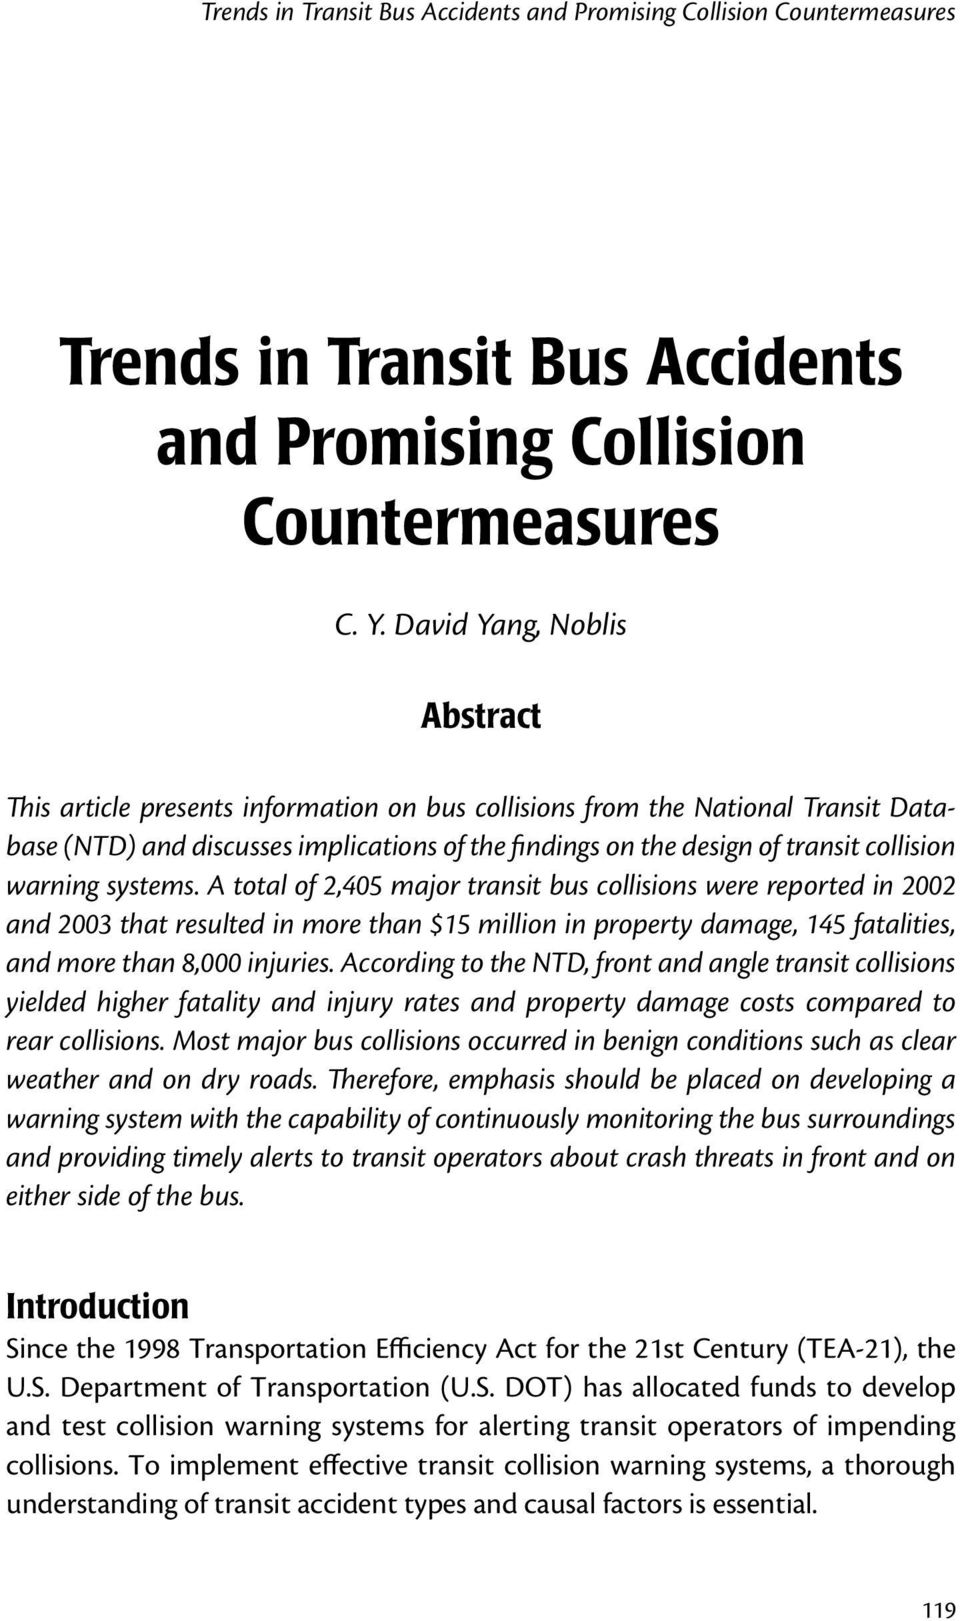 warning systems. A total of 2,405 major transit bus collisions were reported in 2002 and 2003 that resulted in more than $15 million in property damage, 145 fatalities, and more than 8,000 injuries.